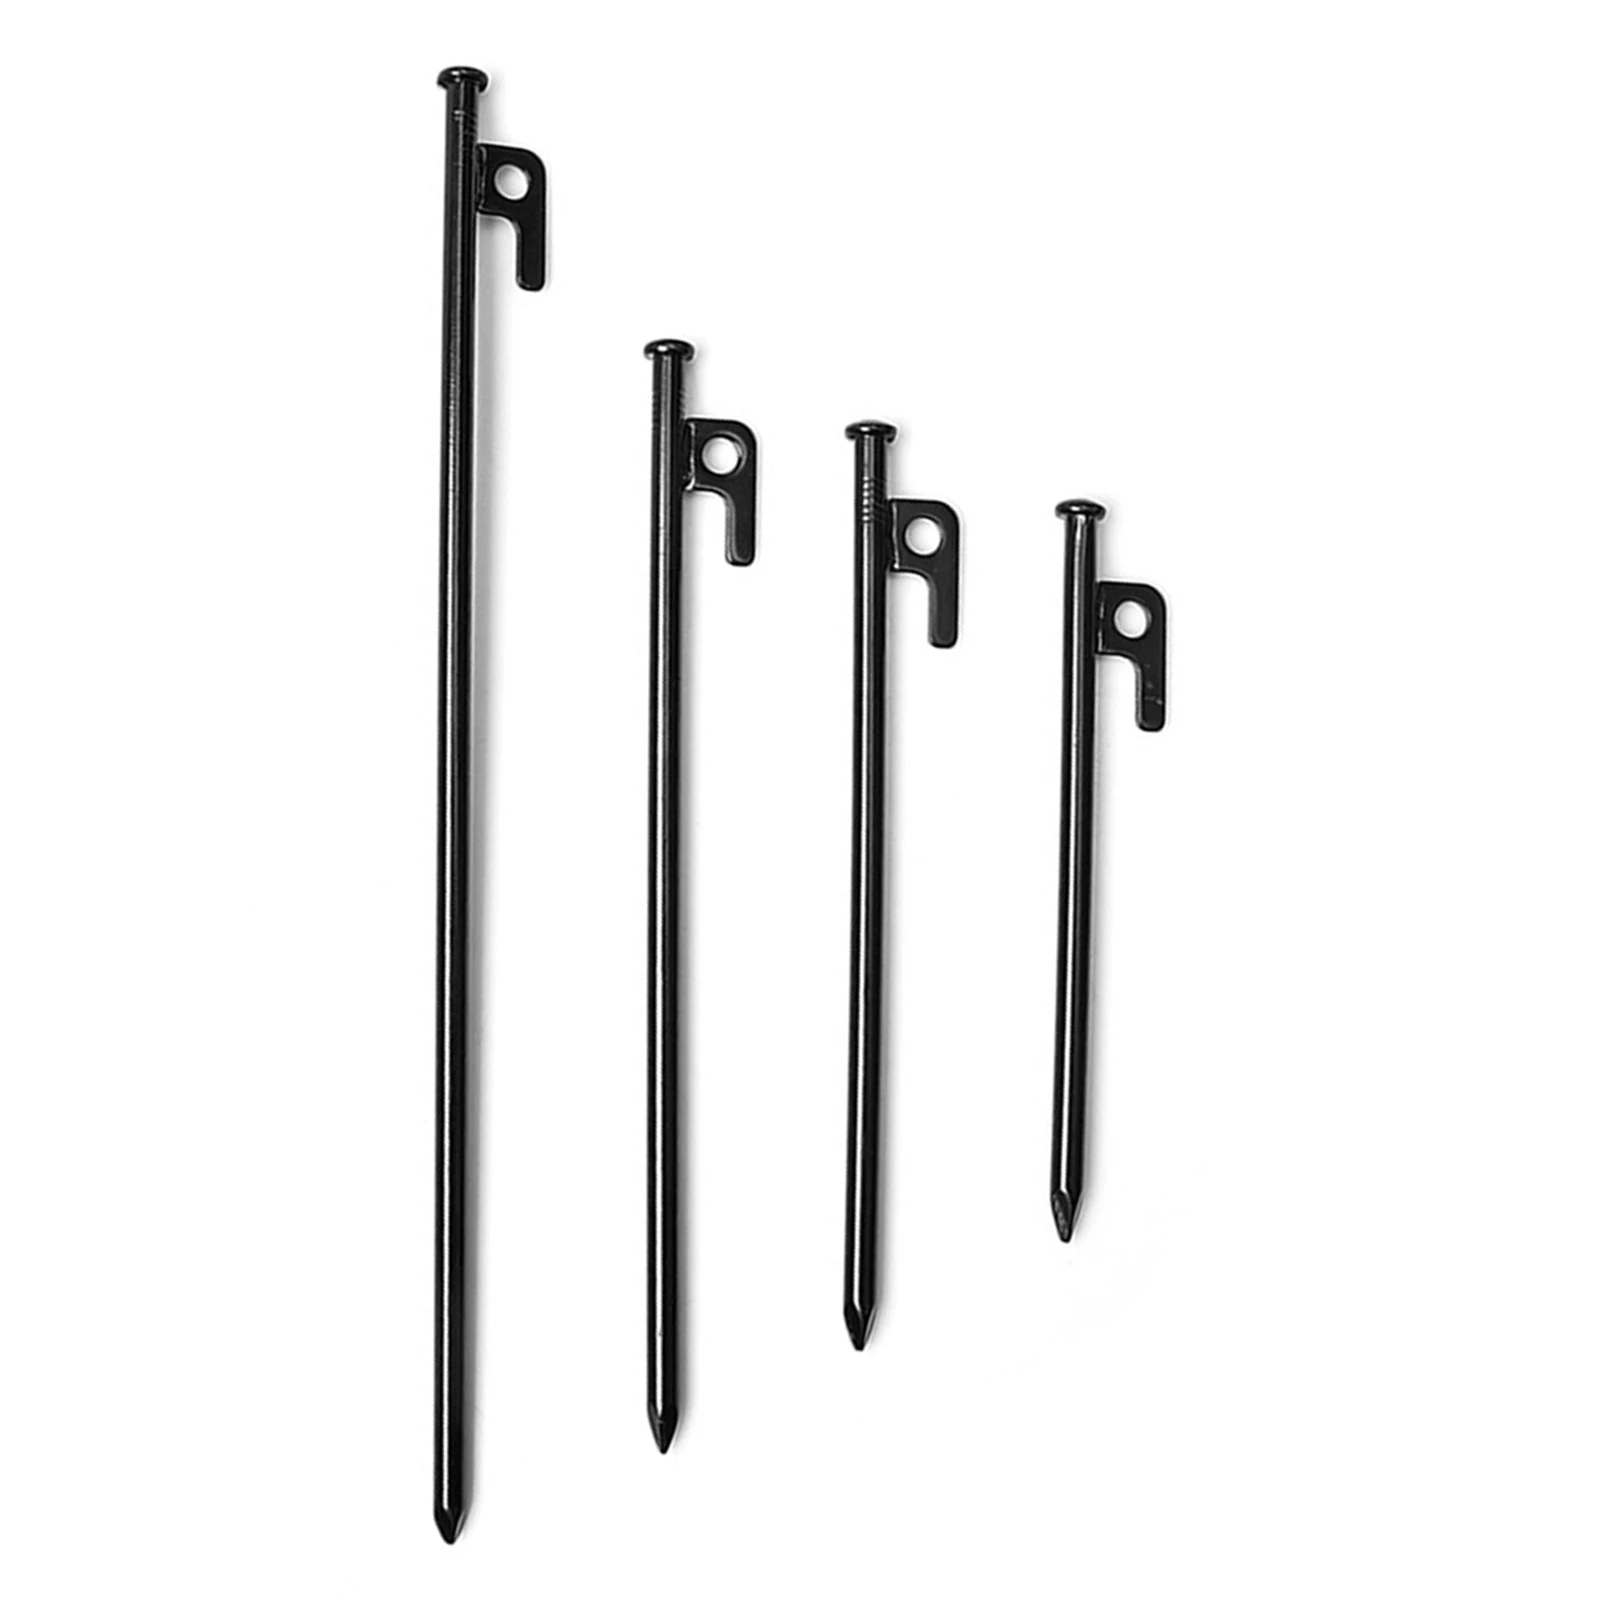 4Pack Multiuse Heavy Duty Tent Stakes Steel Awning Anchor Tarp Pegs Ground Nails Outdoor Camping Hiking Trip